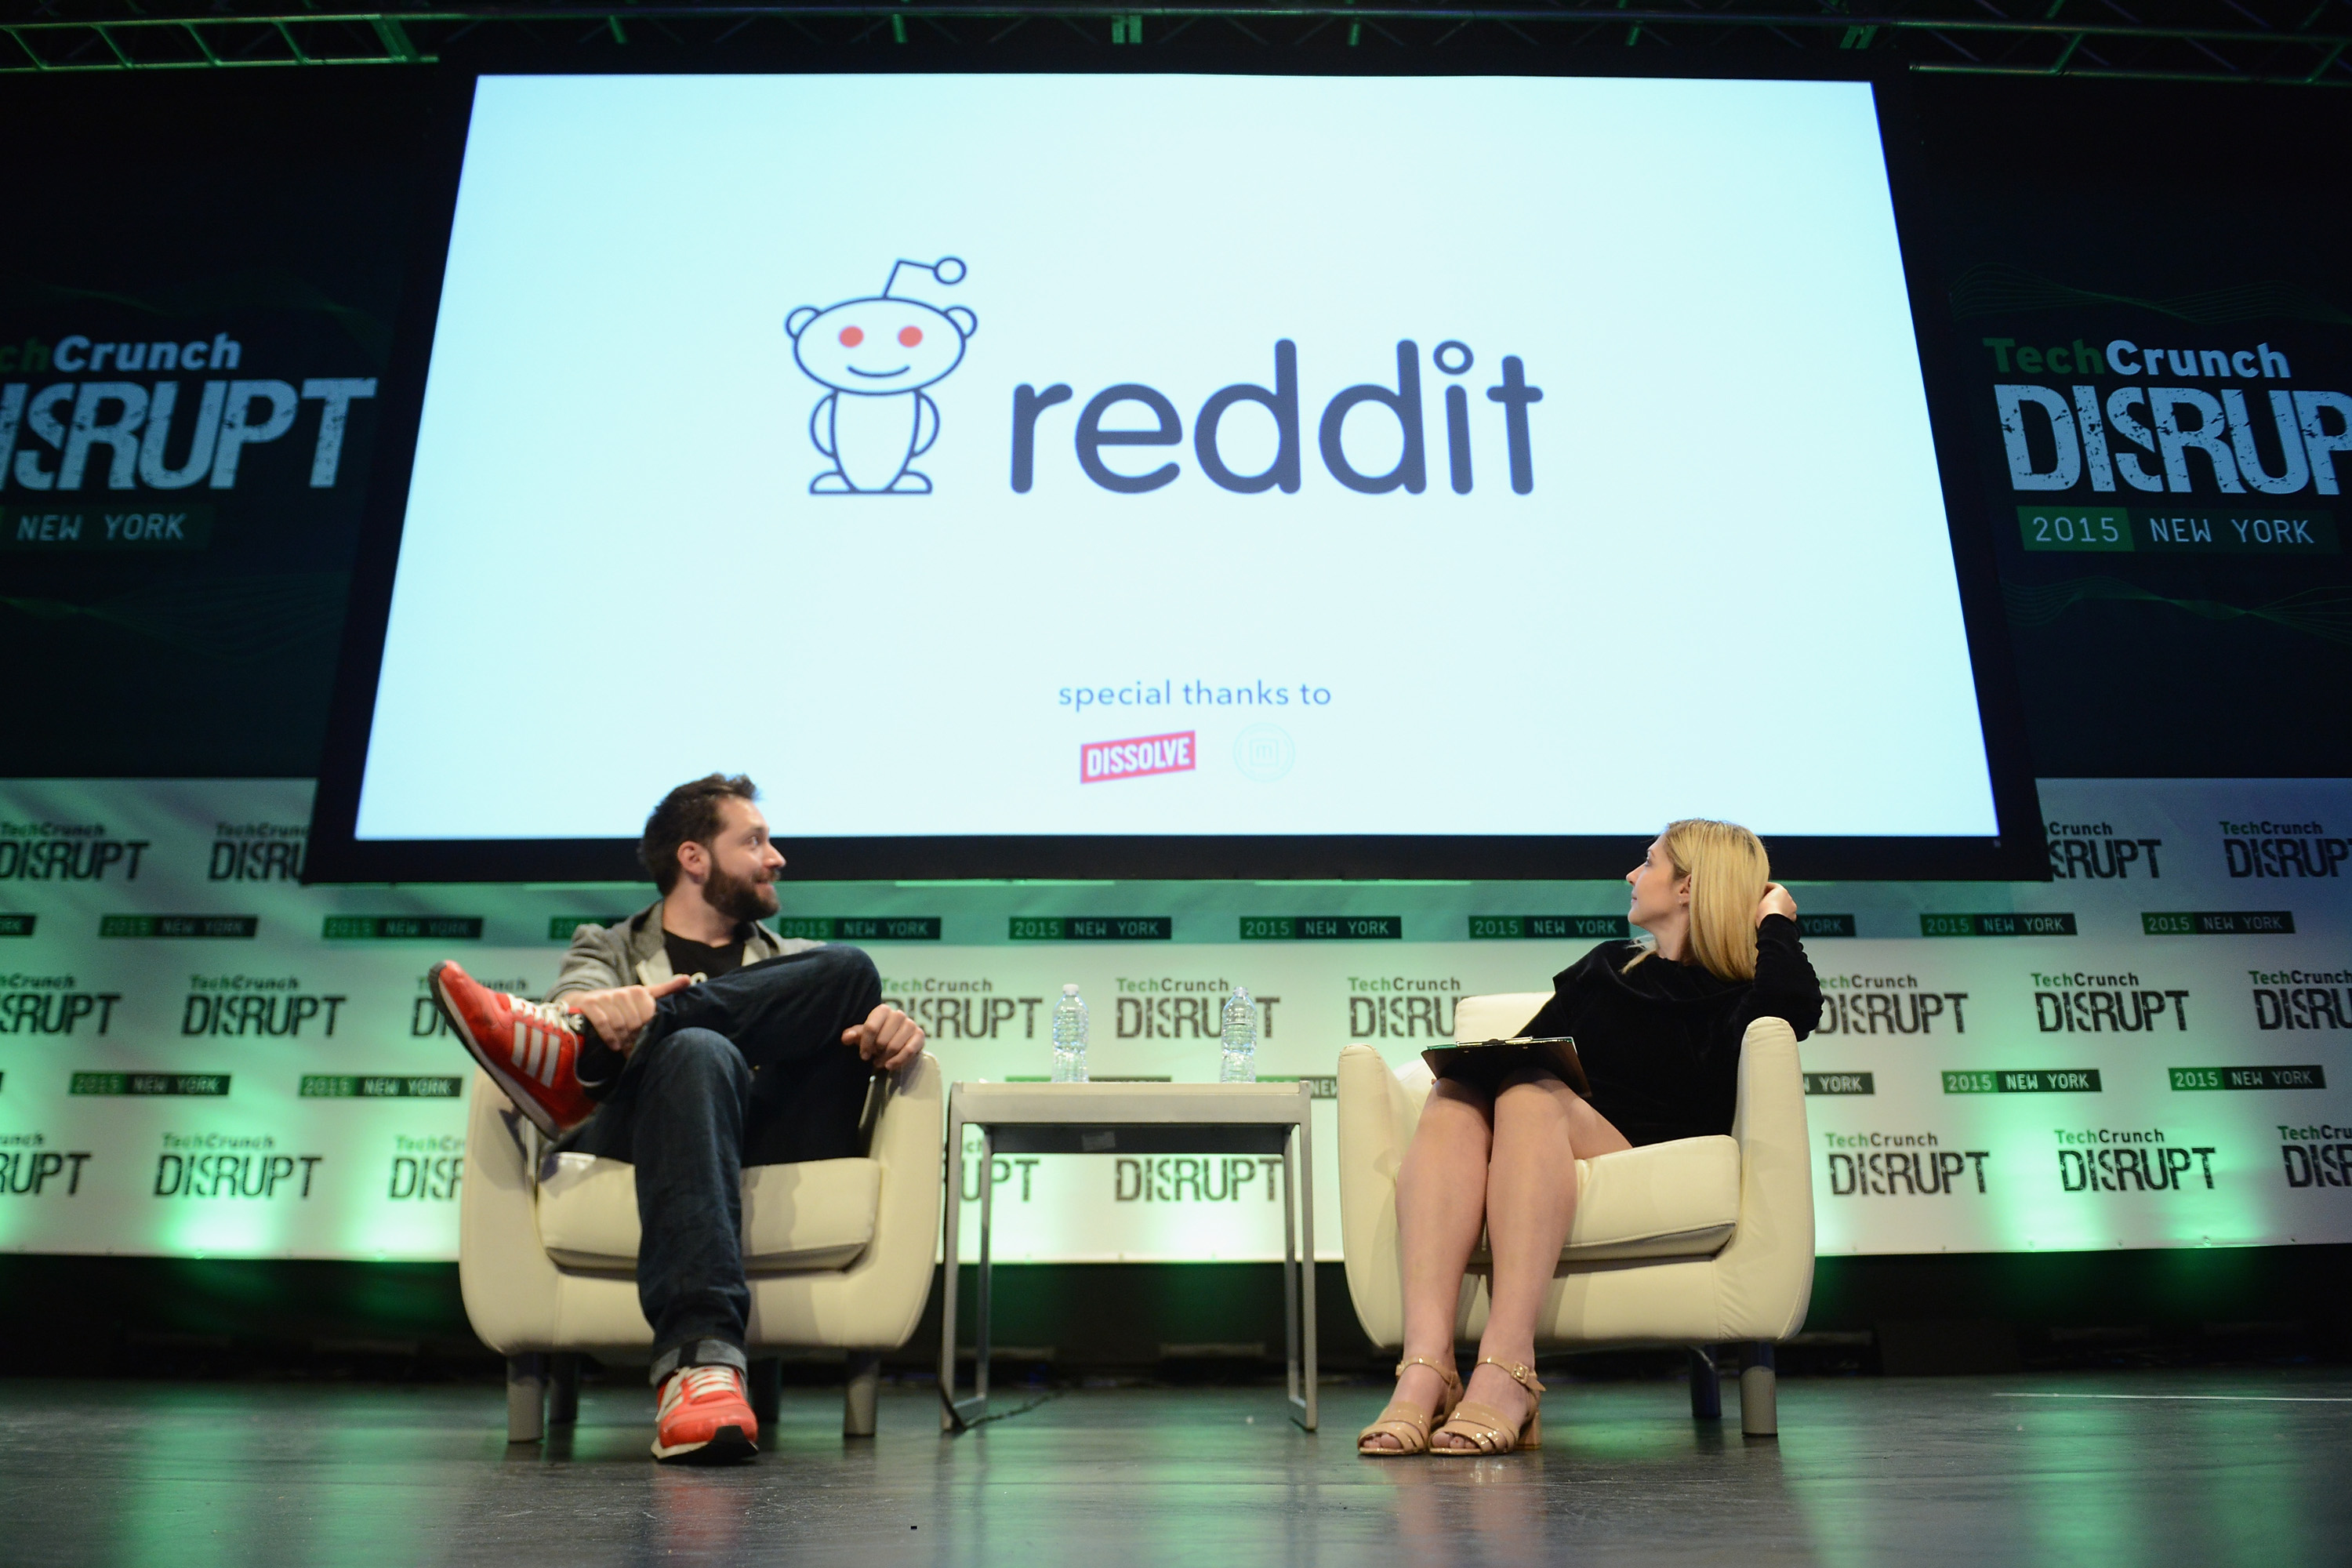 Co-Founder and Executive Chair of Reddit, and Partner at Y Combinator, Alexis Ohanian (L) and co-editor at TechCrunch, Alexia Tsotsis appear onstage during TechCrunch Disrupt NY 2015 - Day 3 at The Manhattan Center on May 6, 2015 in New York City. (Noam Galai—2015 Getty Images)